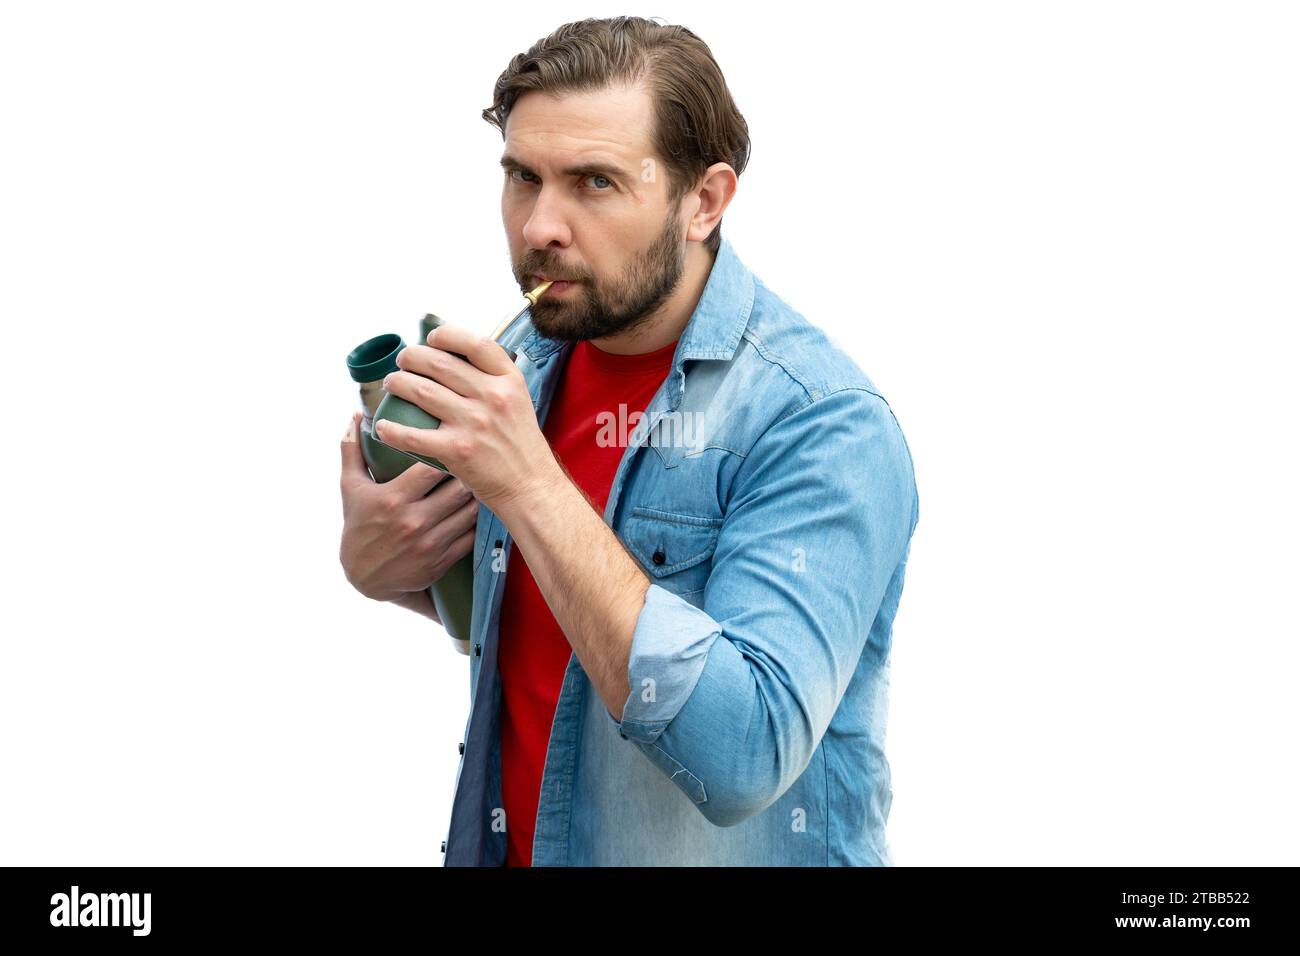 Young man drinking mate, holding the thermos in one arm. Stock Photo